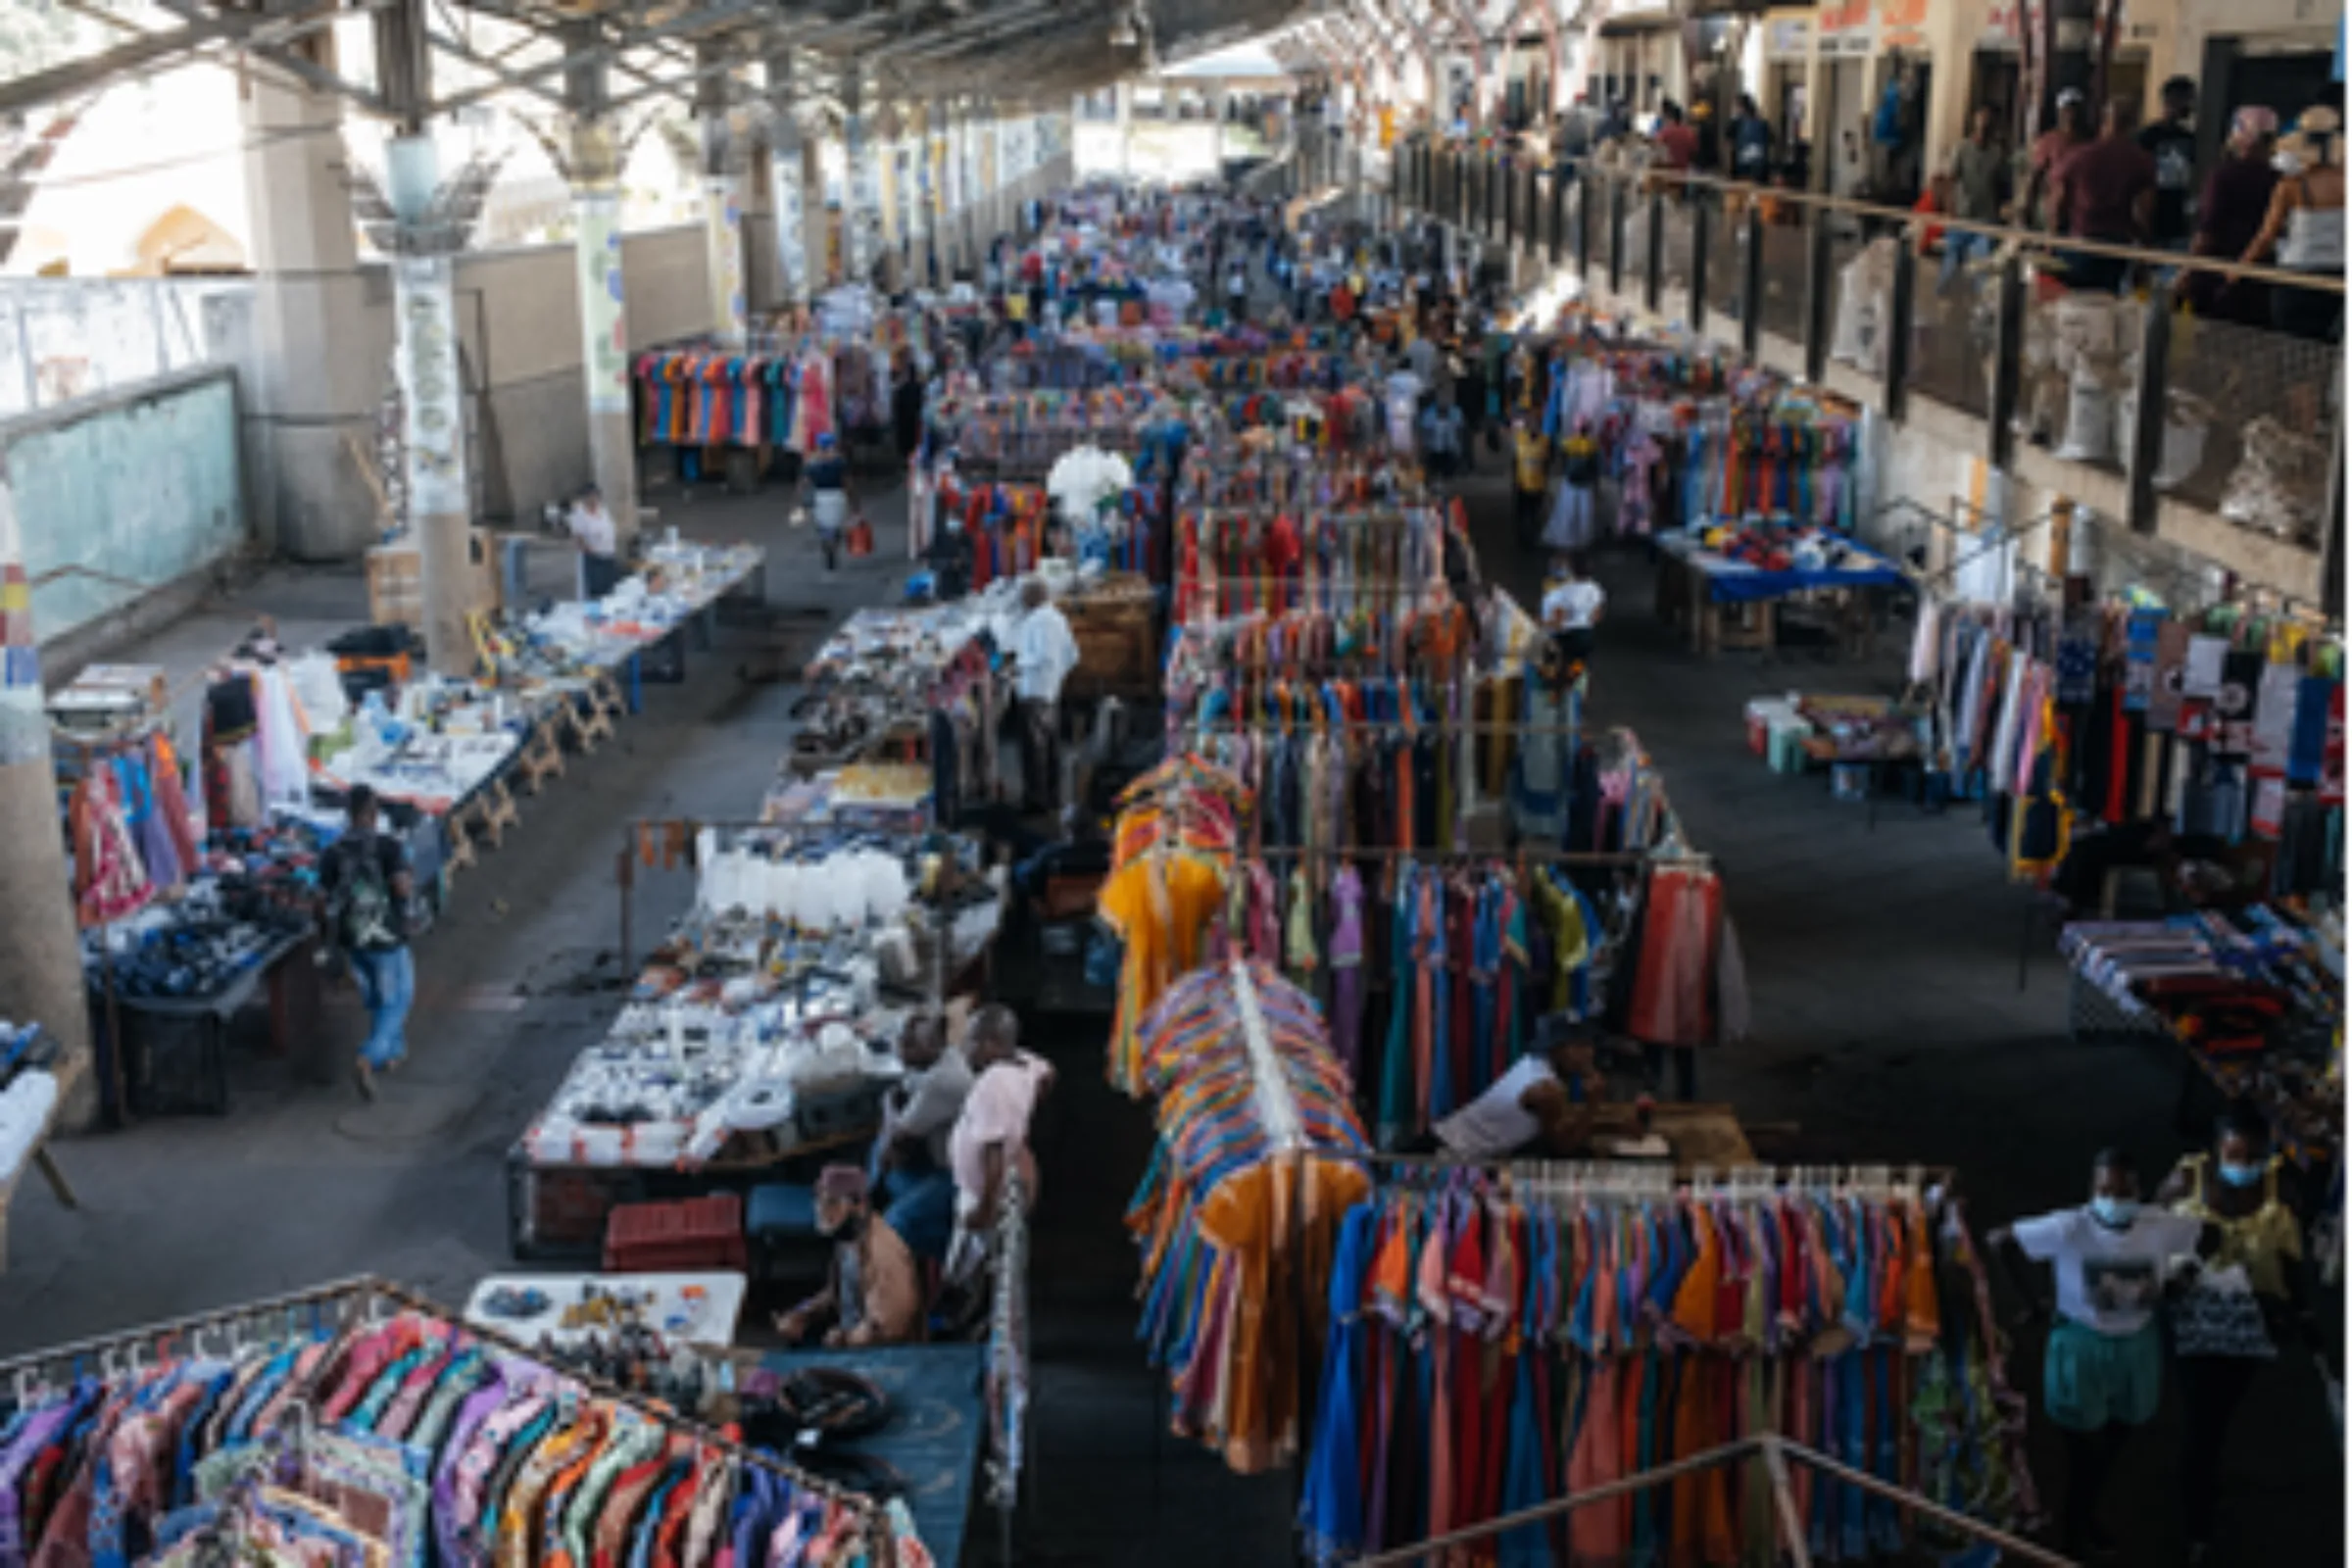 Potential buyers look at the wares at Warwick Market in inner-city Durban, South Africa March 31, 2021. Informal traders at the busy market offer everything from fresh produce and traditional medicine to clothes and music. Thomson Reuters Foundation/James Puttick.